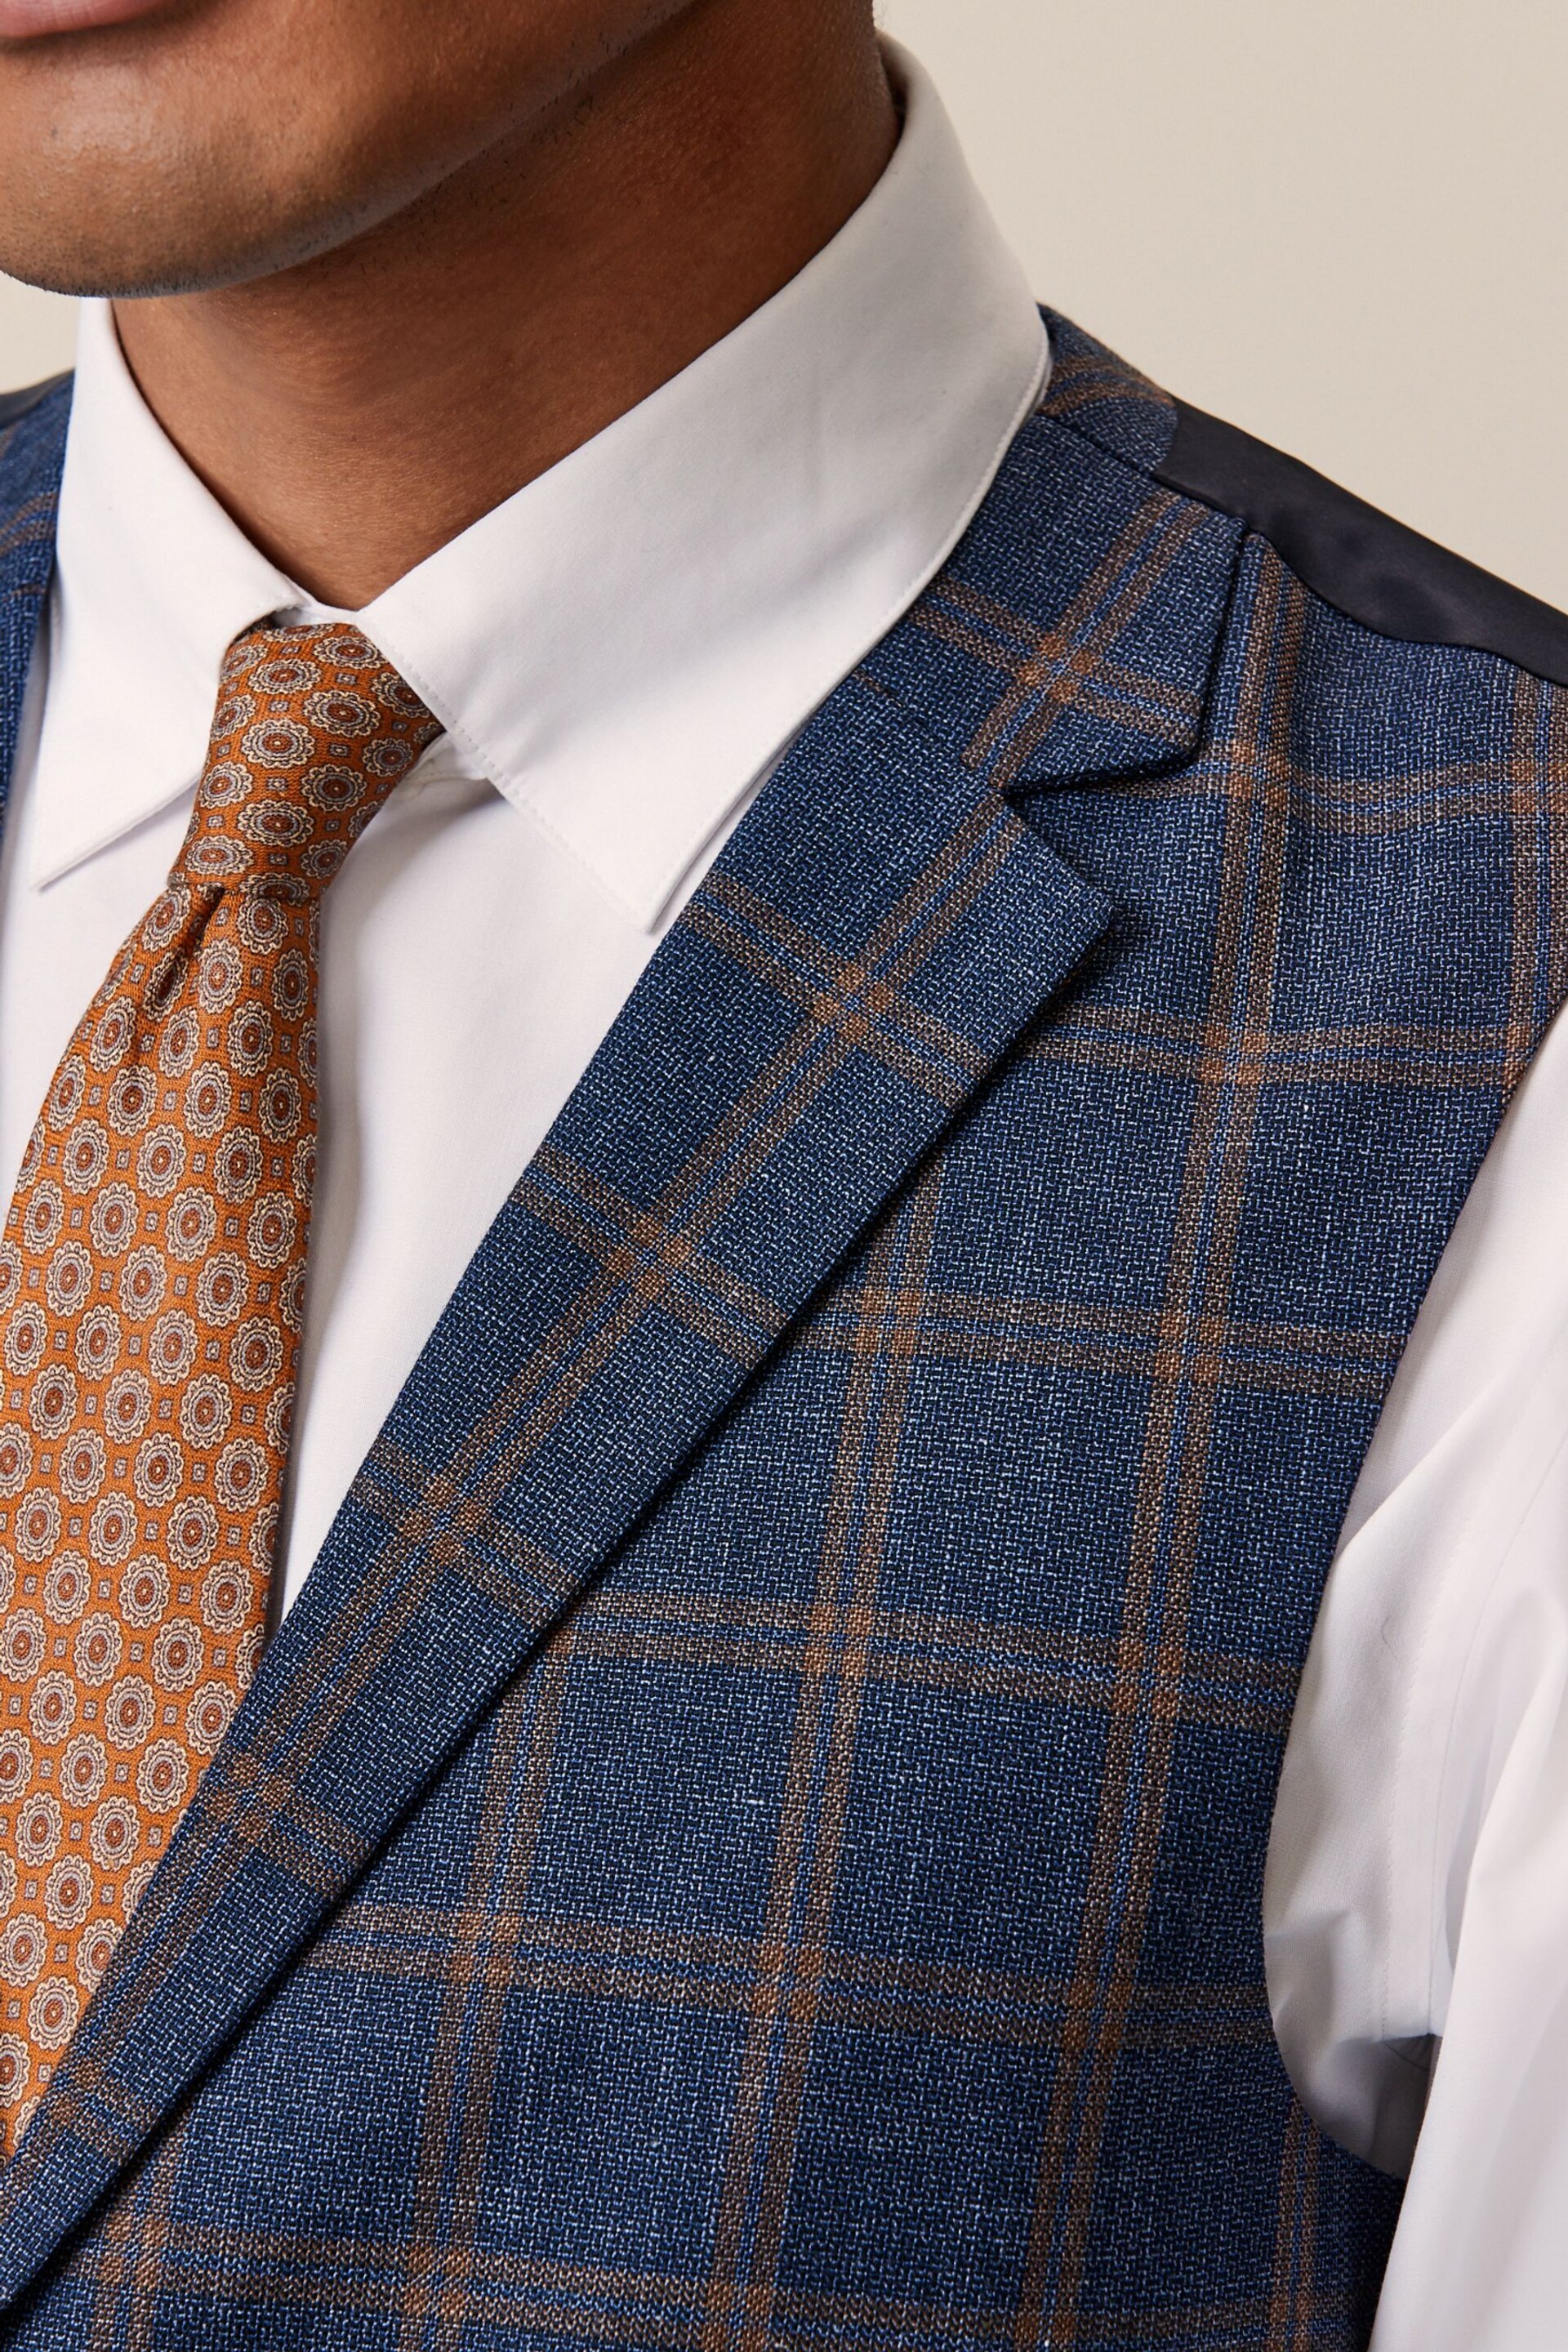 Bright Blue Skinny Trimmed Check Suit Waistcoat - Image 4 of 10